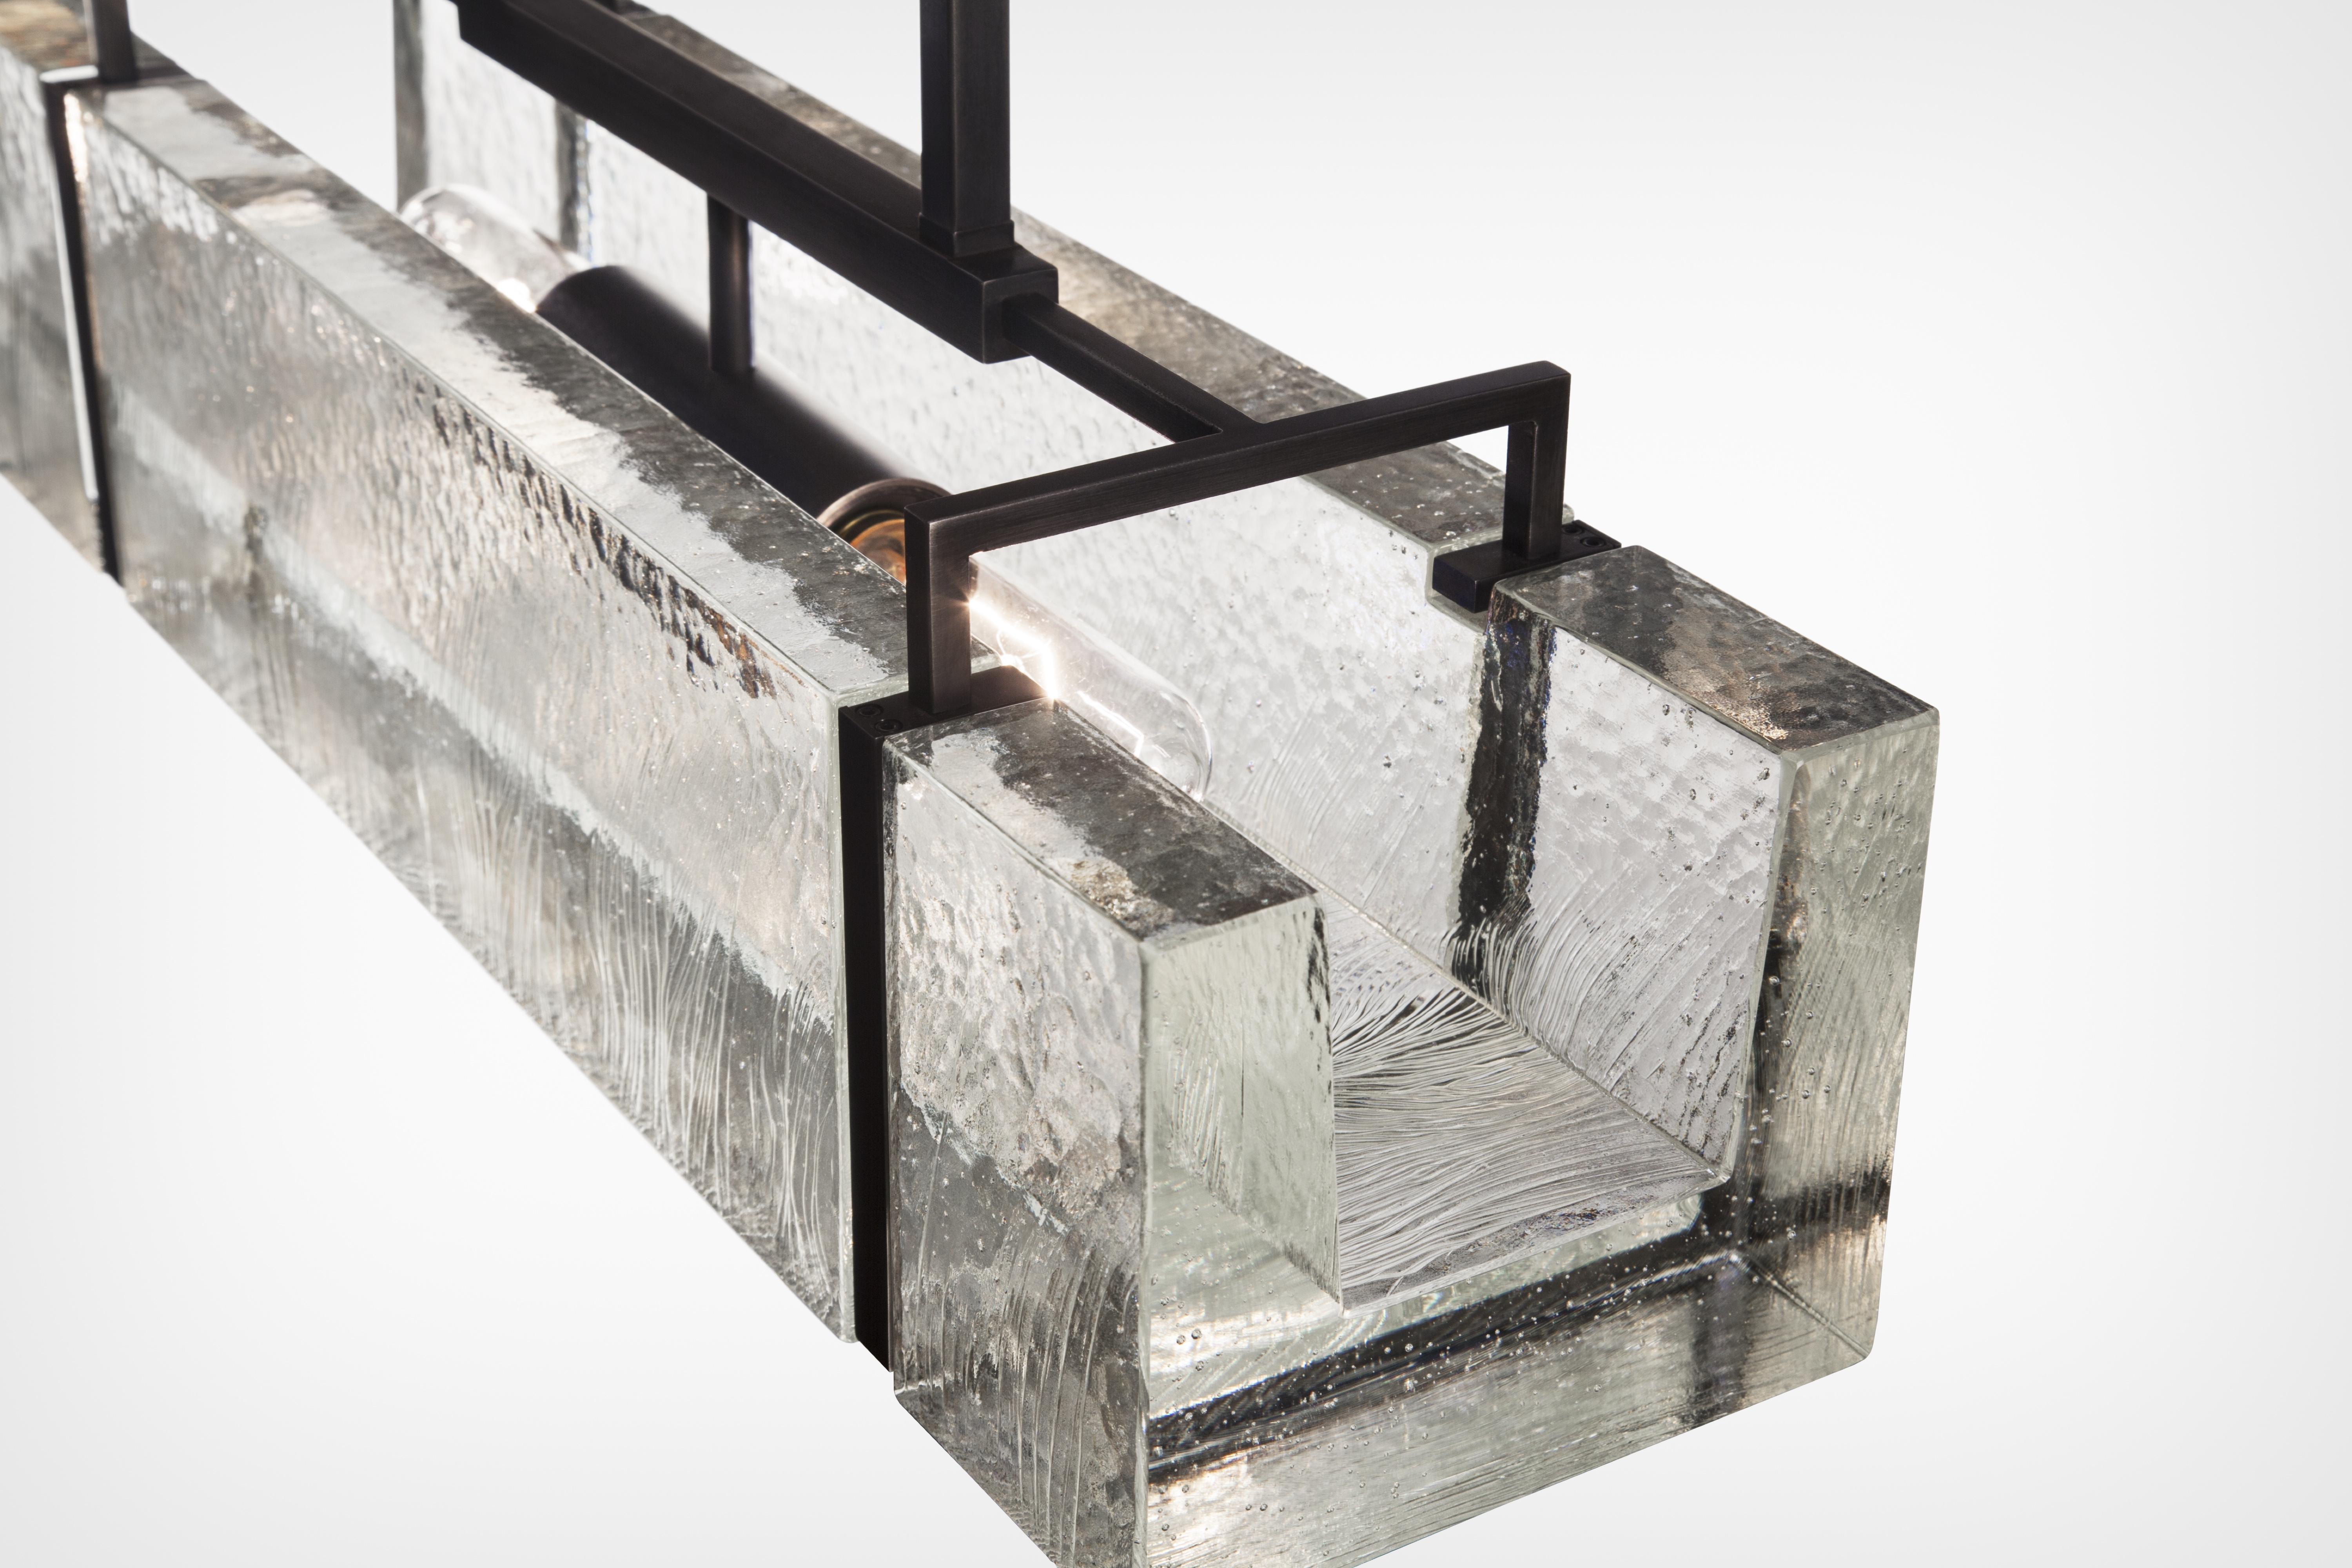 The Trough Light is crafted from crystal cast to mimic blocks of ice, and set in a frame that is reminiscent of industrial ice tongs. The casting process results in textural ripples across the surface of the weighty crystal, creating ethereal